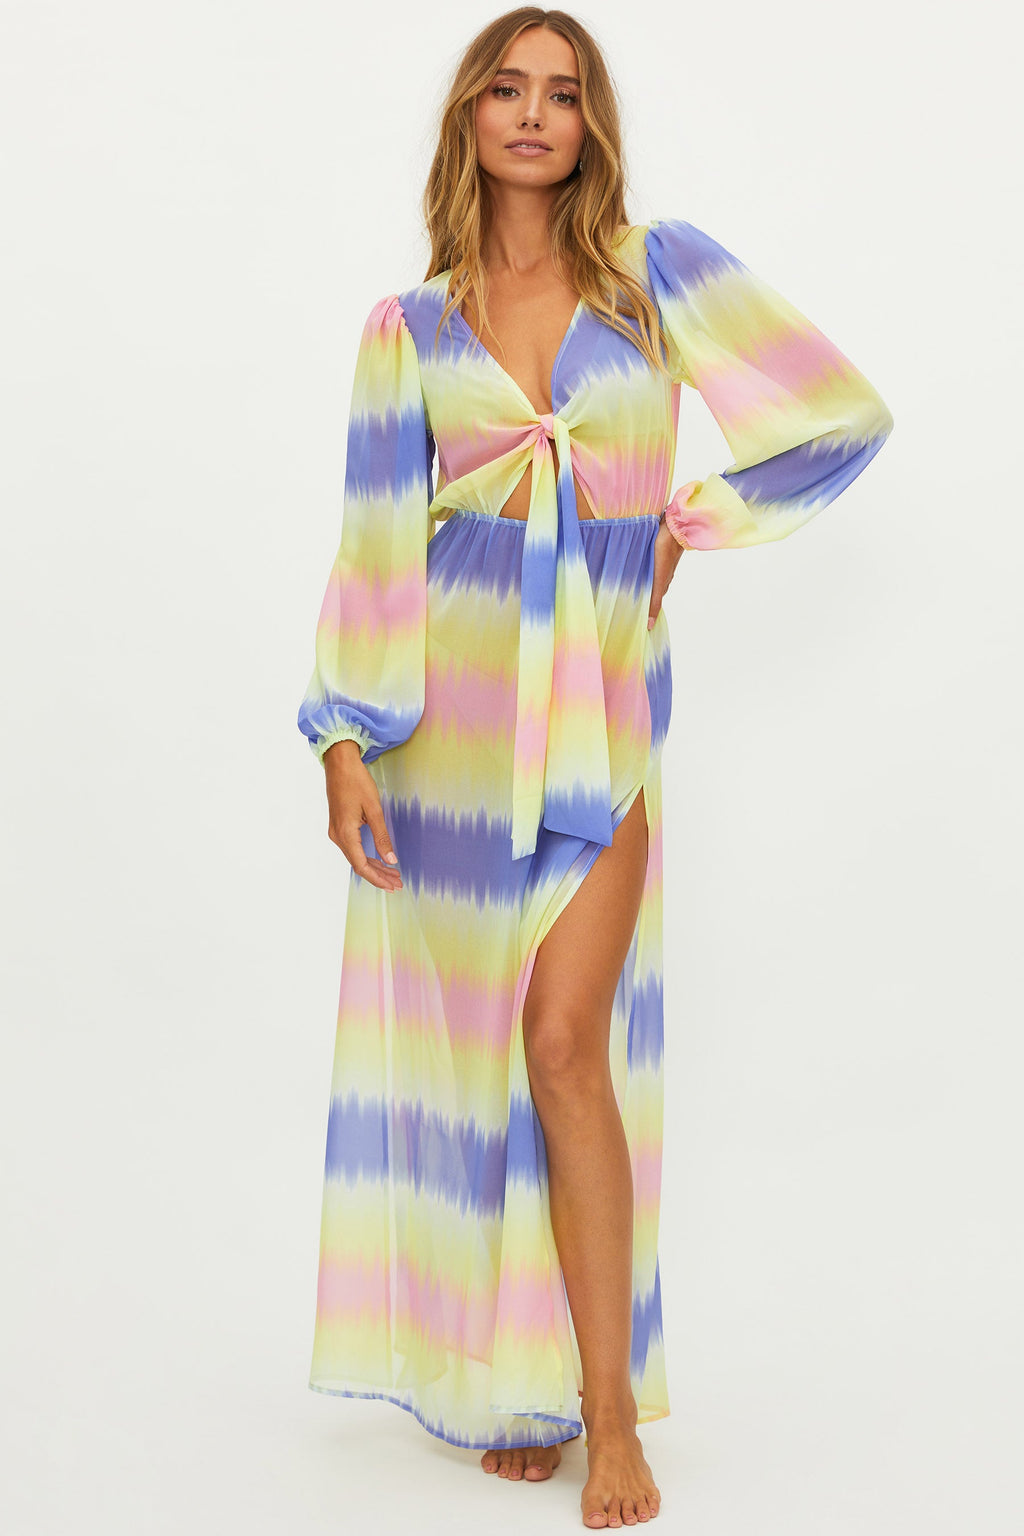 Shiloh Cover Up Cotton Candy Ombre Shine